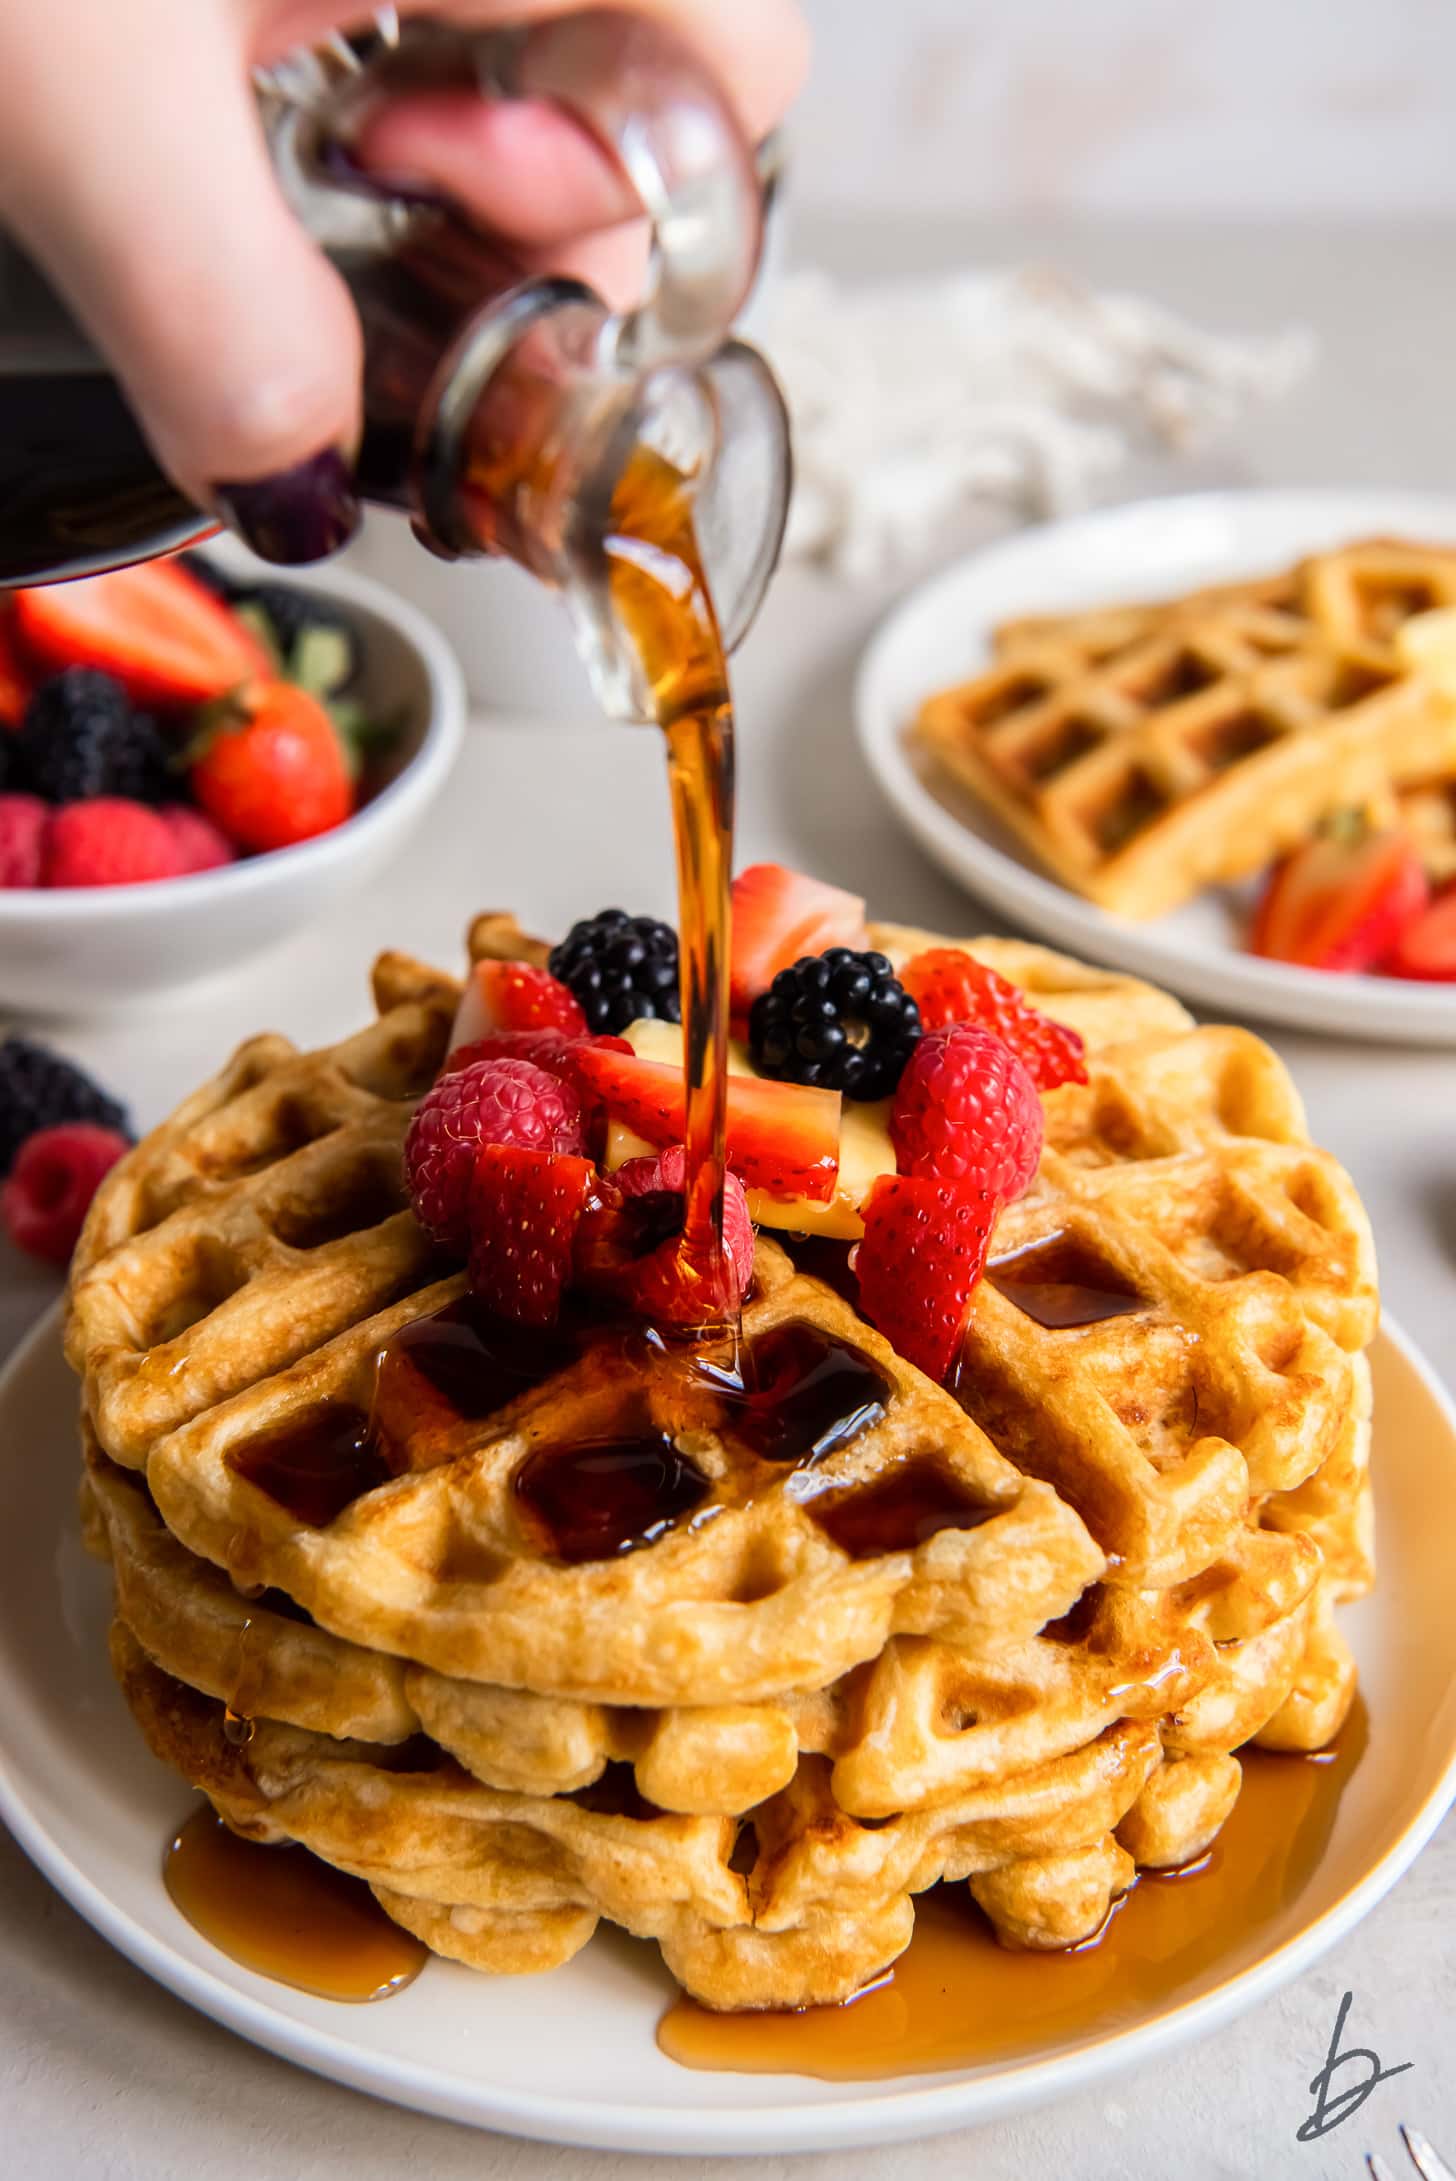 hand holding glass pitcher of maple syrup and pouring syrup over stack of waffles with berries